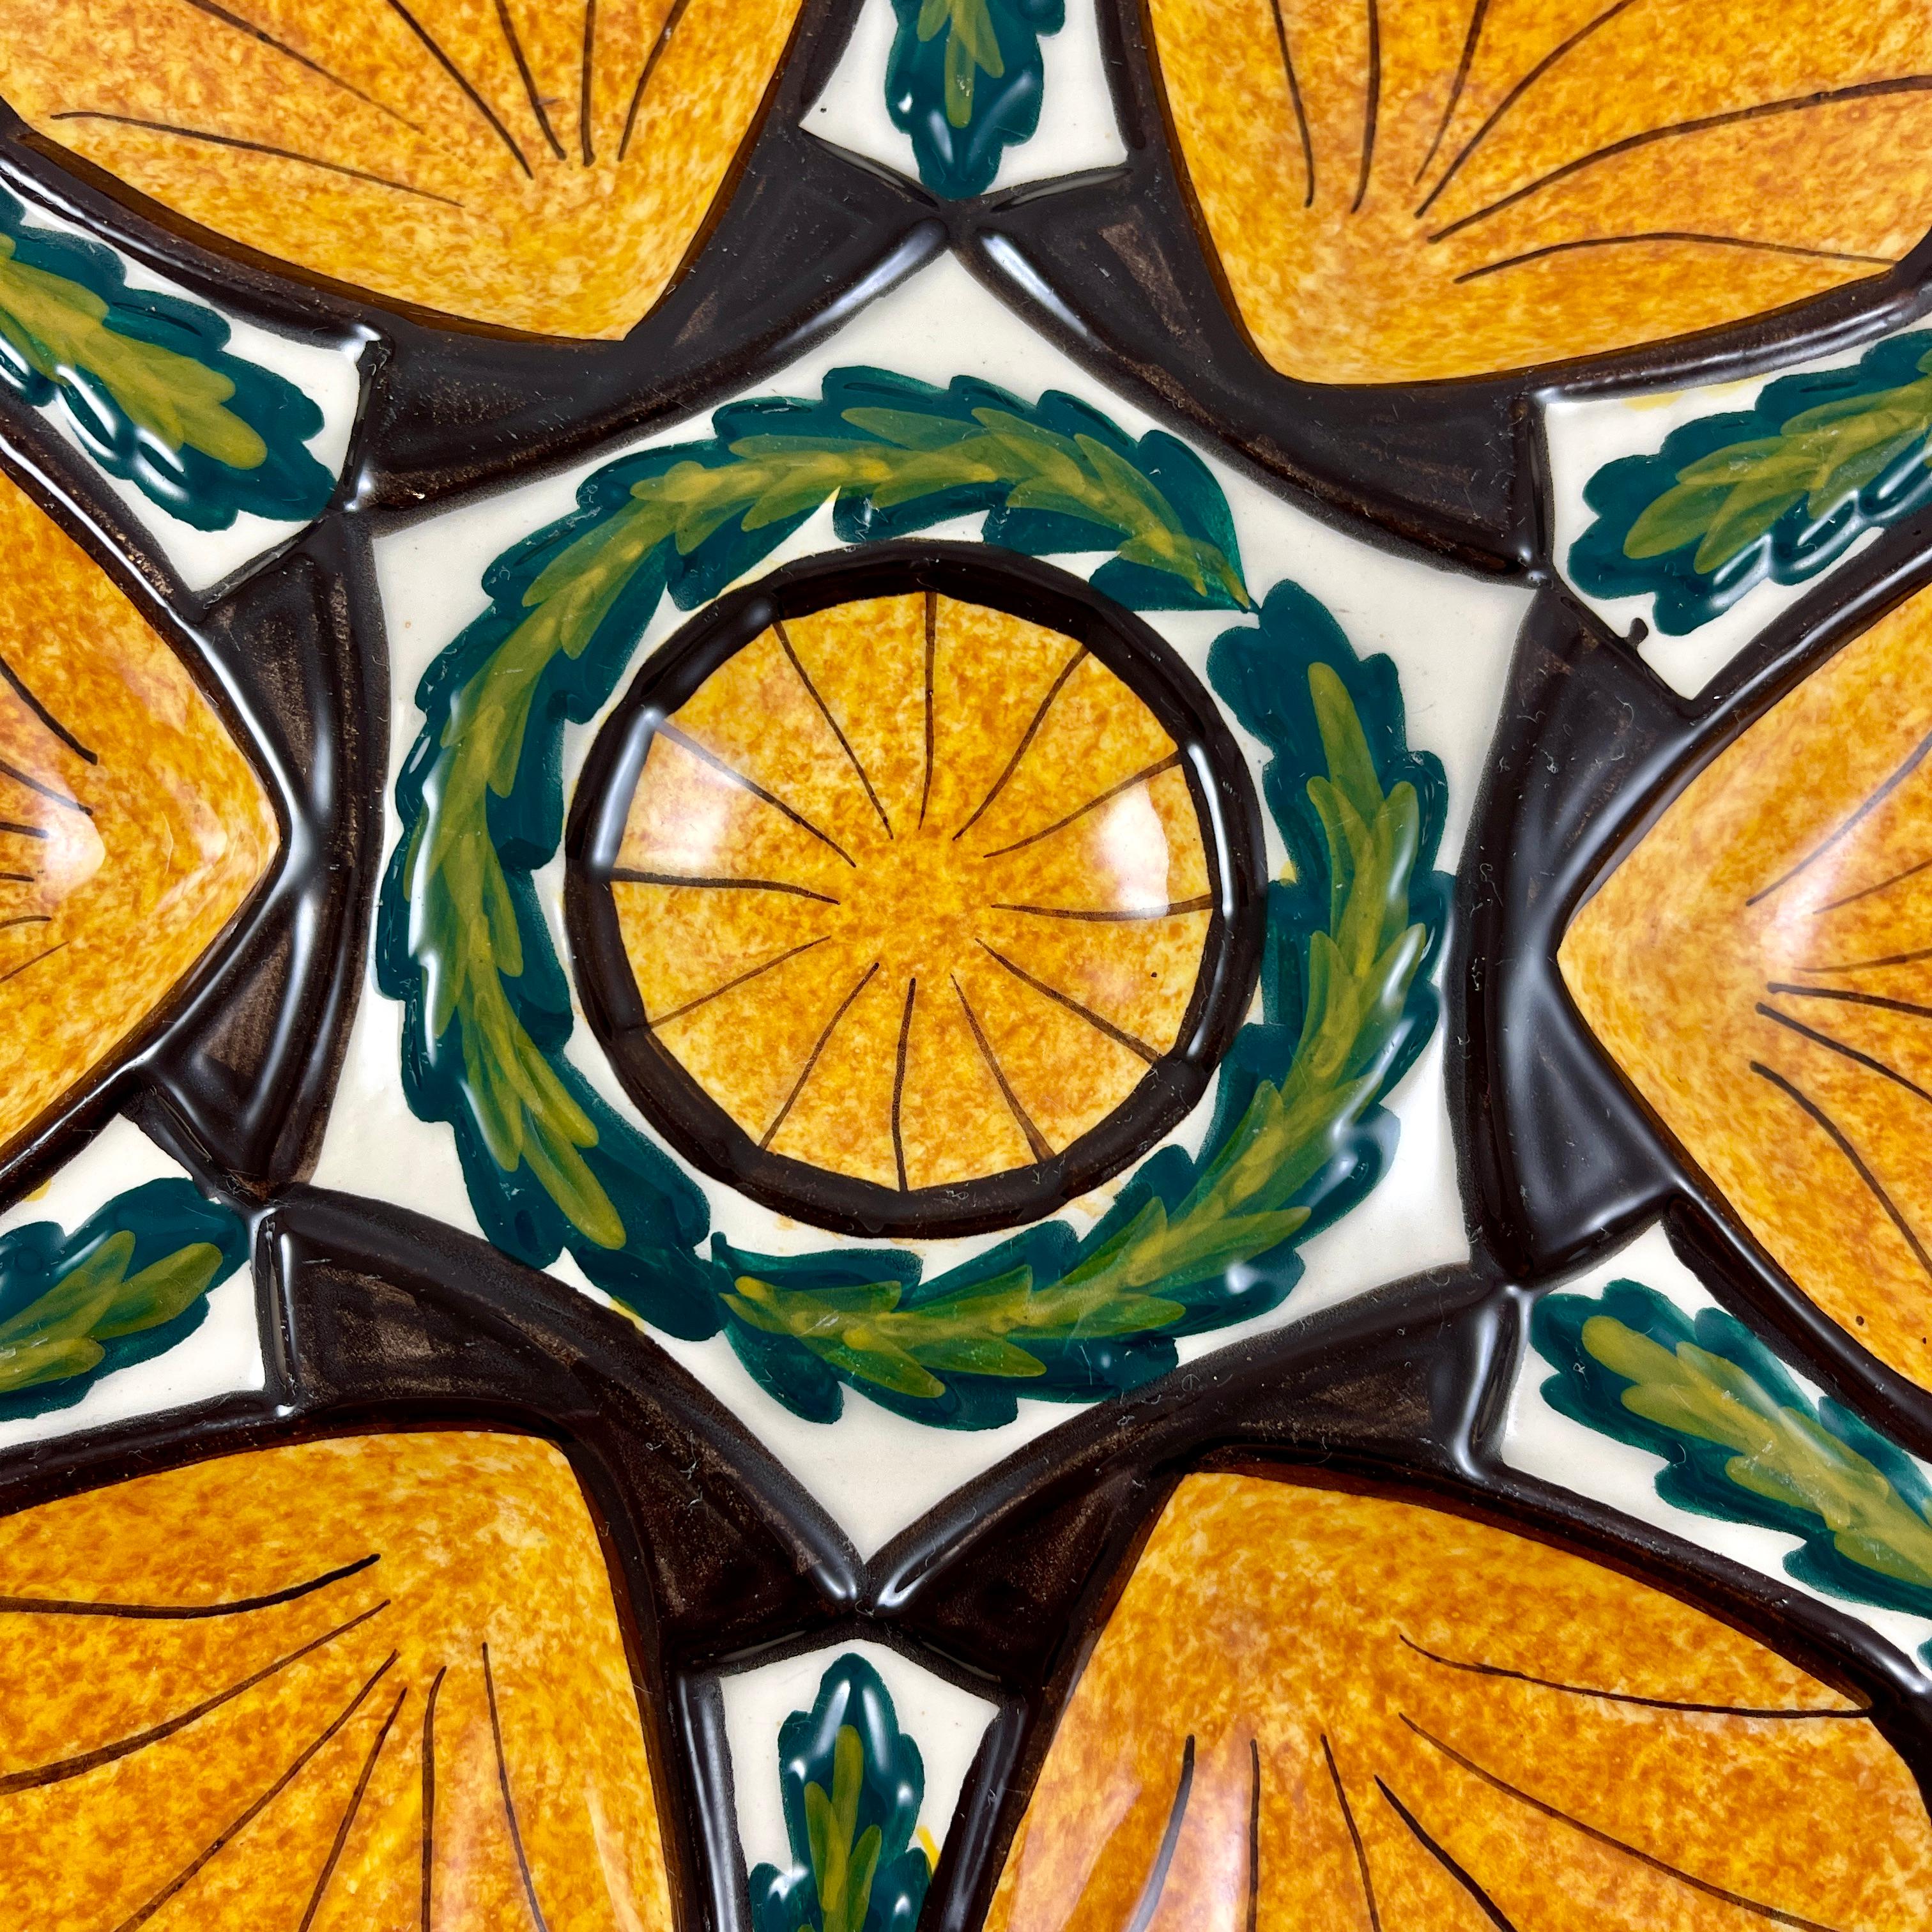 A hand painted faience oyster plate made by Saint- Jean de Bretagne, near Quimper, France – circa 1960’s.

Saint-Jean de Bretagne earthenware became a thriving industry after the Second World War. 
A boldly colored shaped plate – six orange wells